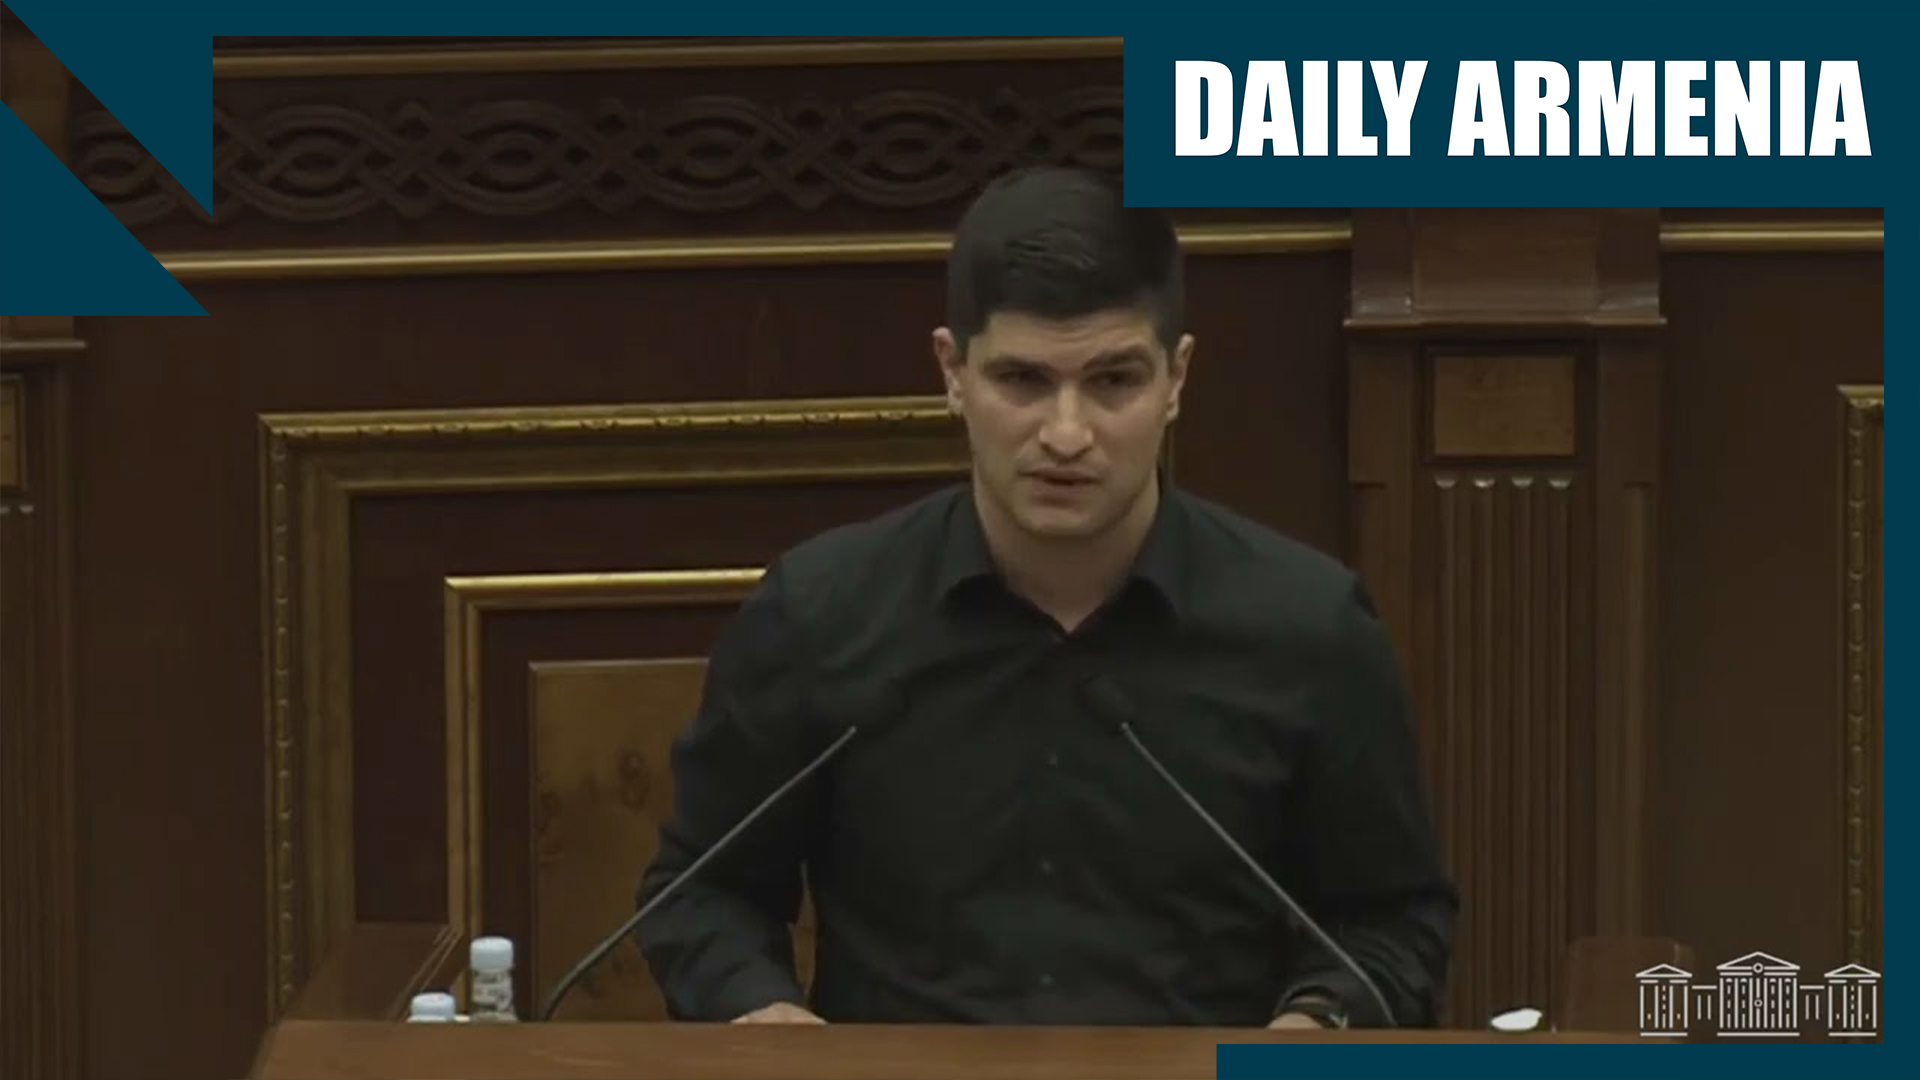 Azerbaijani-soldier-who-crossed-into-Armenia-murdered-Armenian-civilian,-says-ruling-party-MP